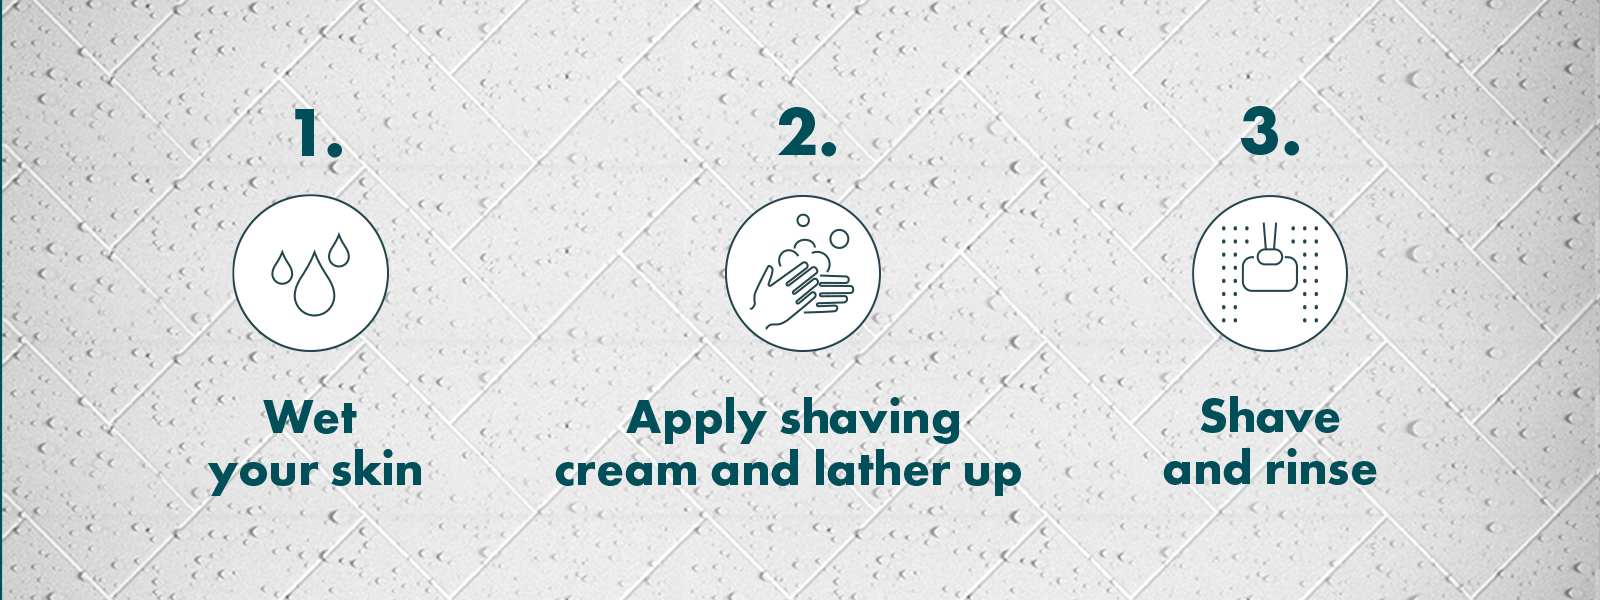 1. Wet your skin, 2. Apply cream and lather up, 3. Shave and rinse